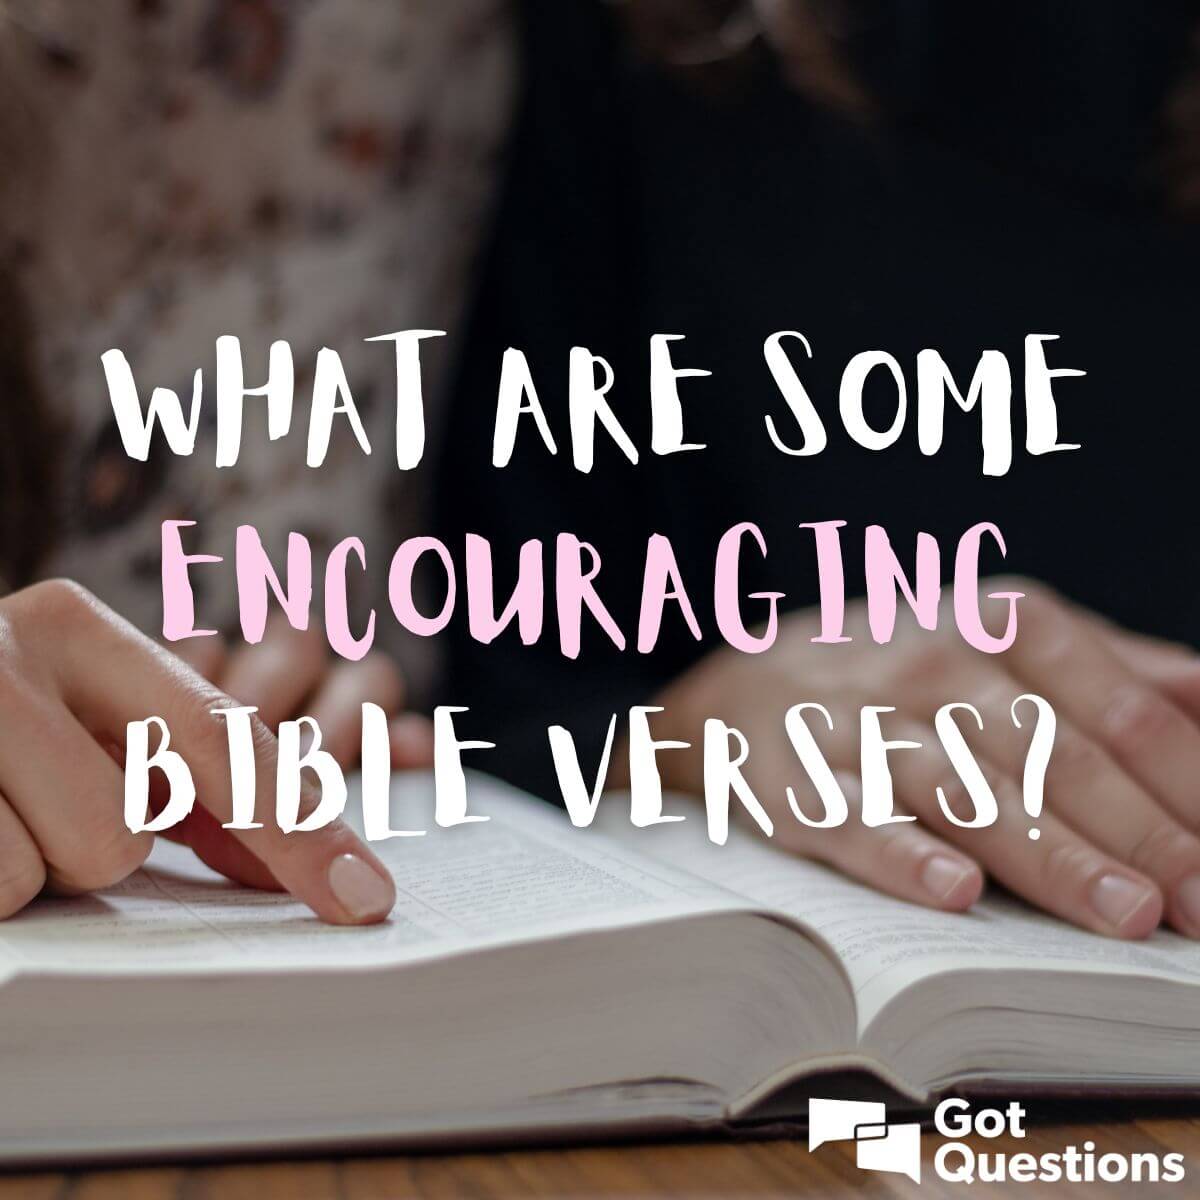 What are some encouraging Bible verses?